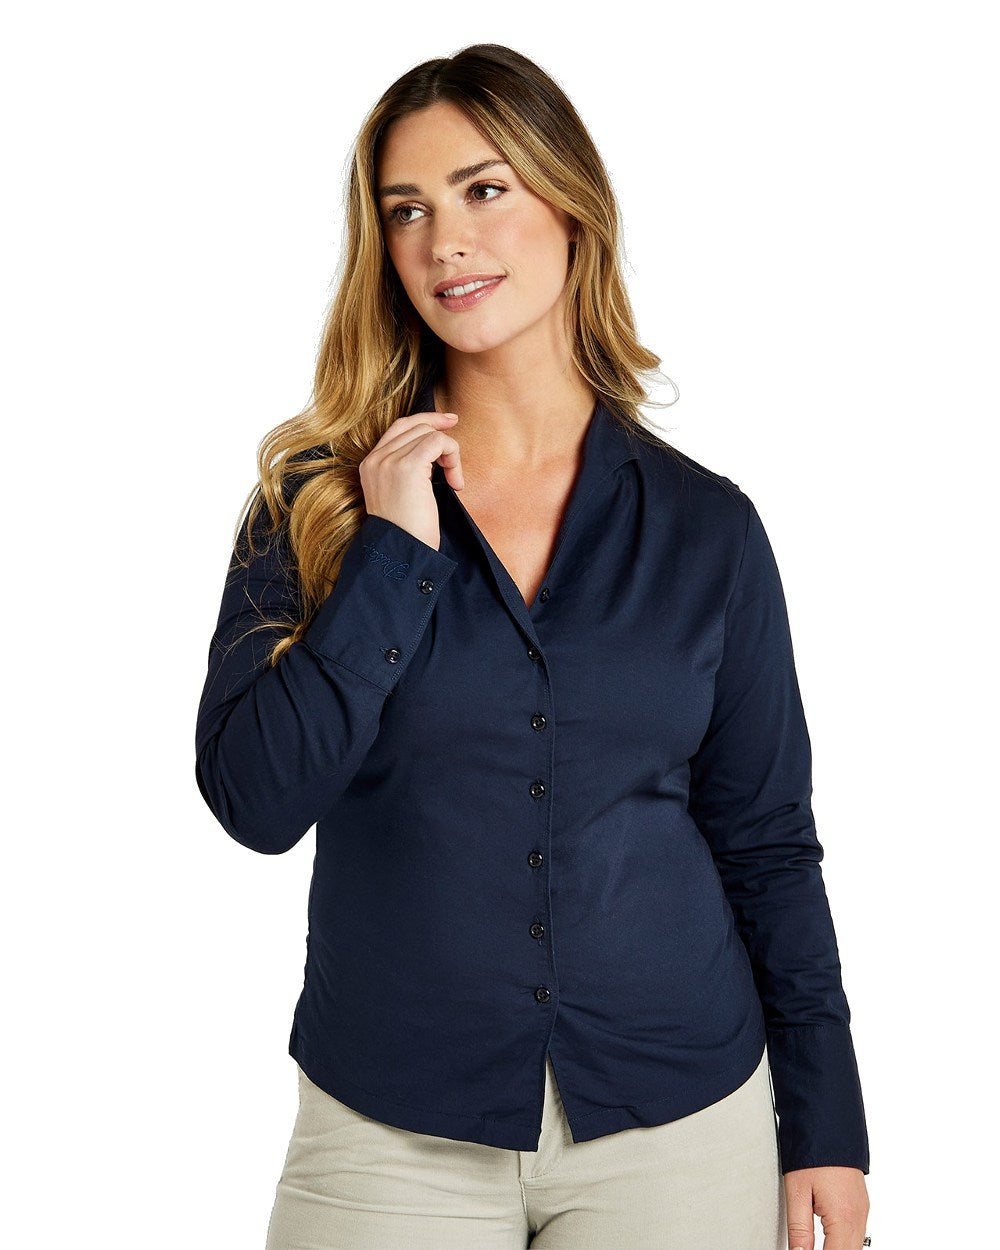 Becky Short Sleeved Blouse In Plus Size - Oxford Navy Blue